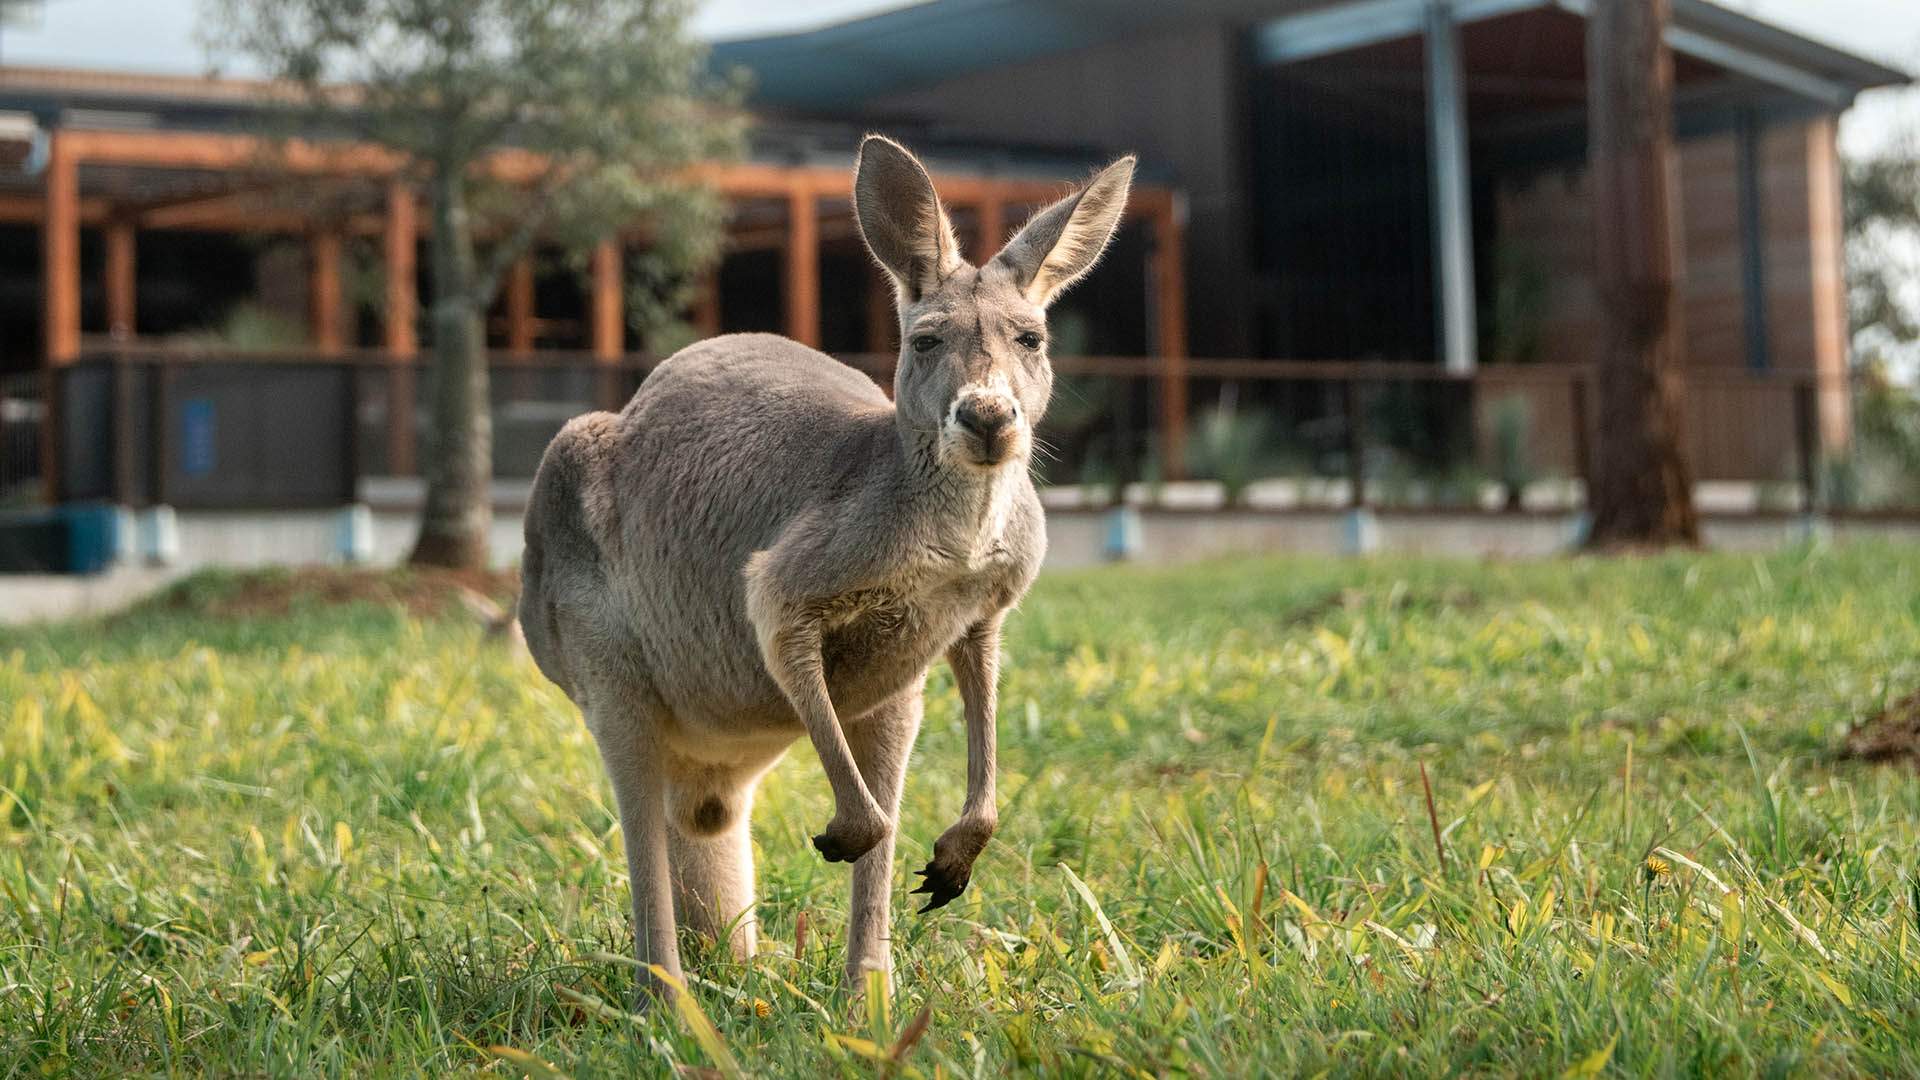 Australia Zoo Now Has Eight Cabins for Overnight Stays Among the Animals —  Plus a Restaurant and Bar - Concrete Playground